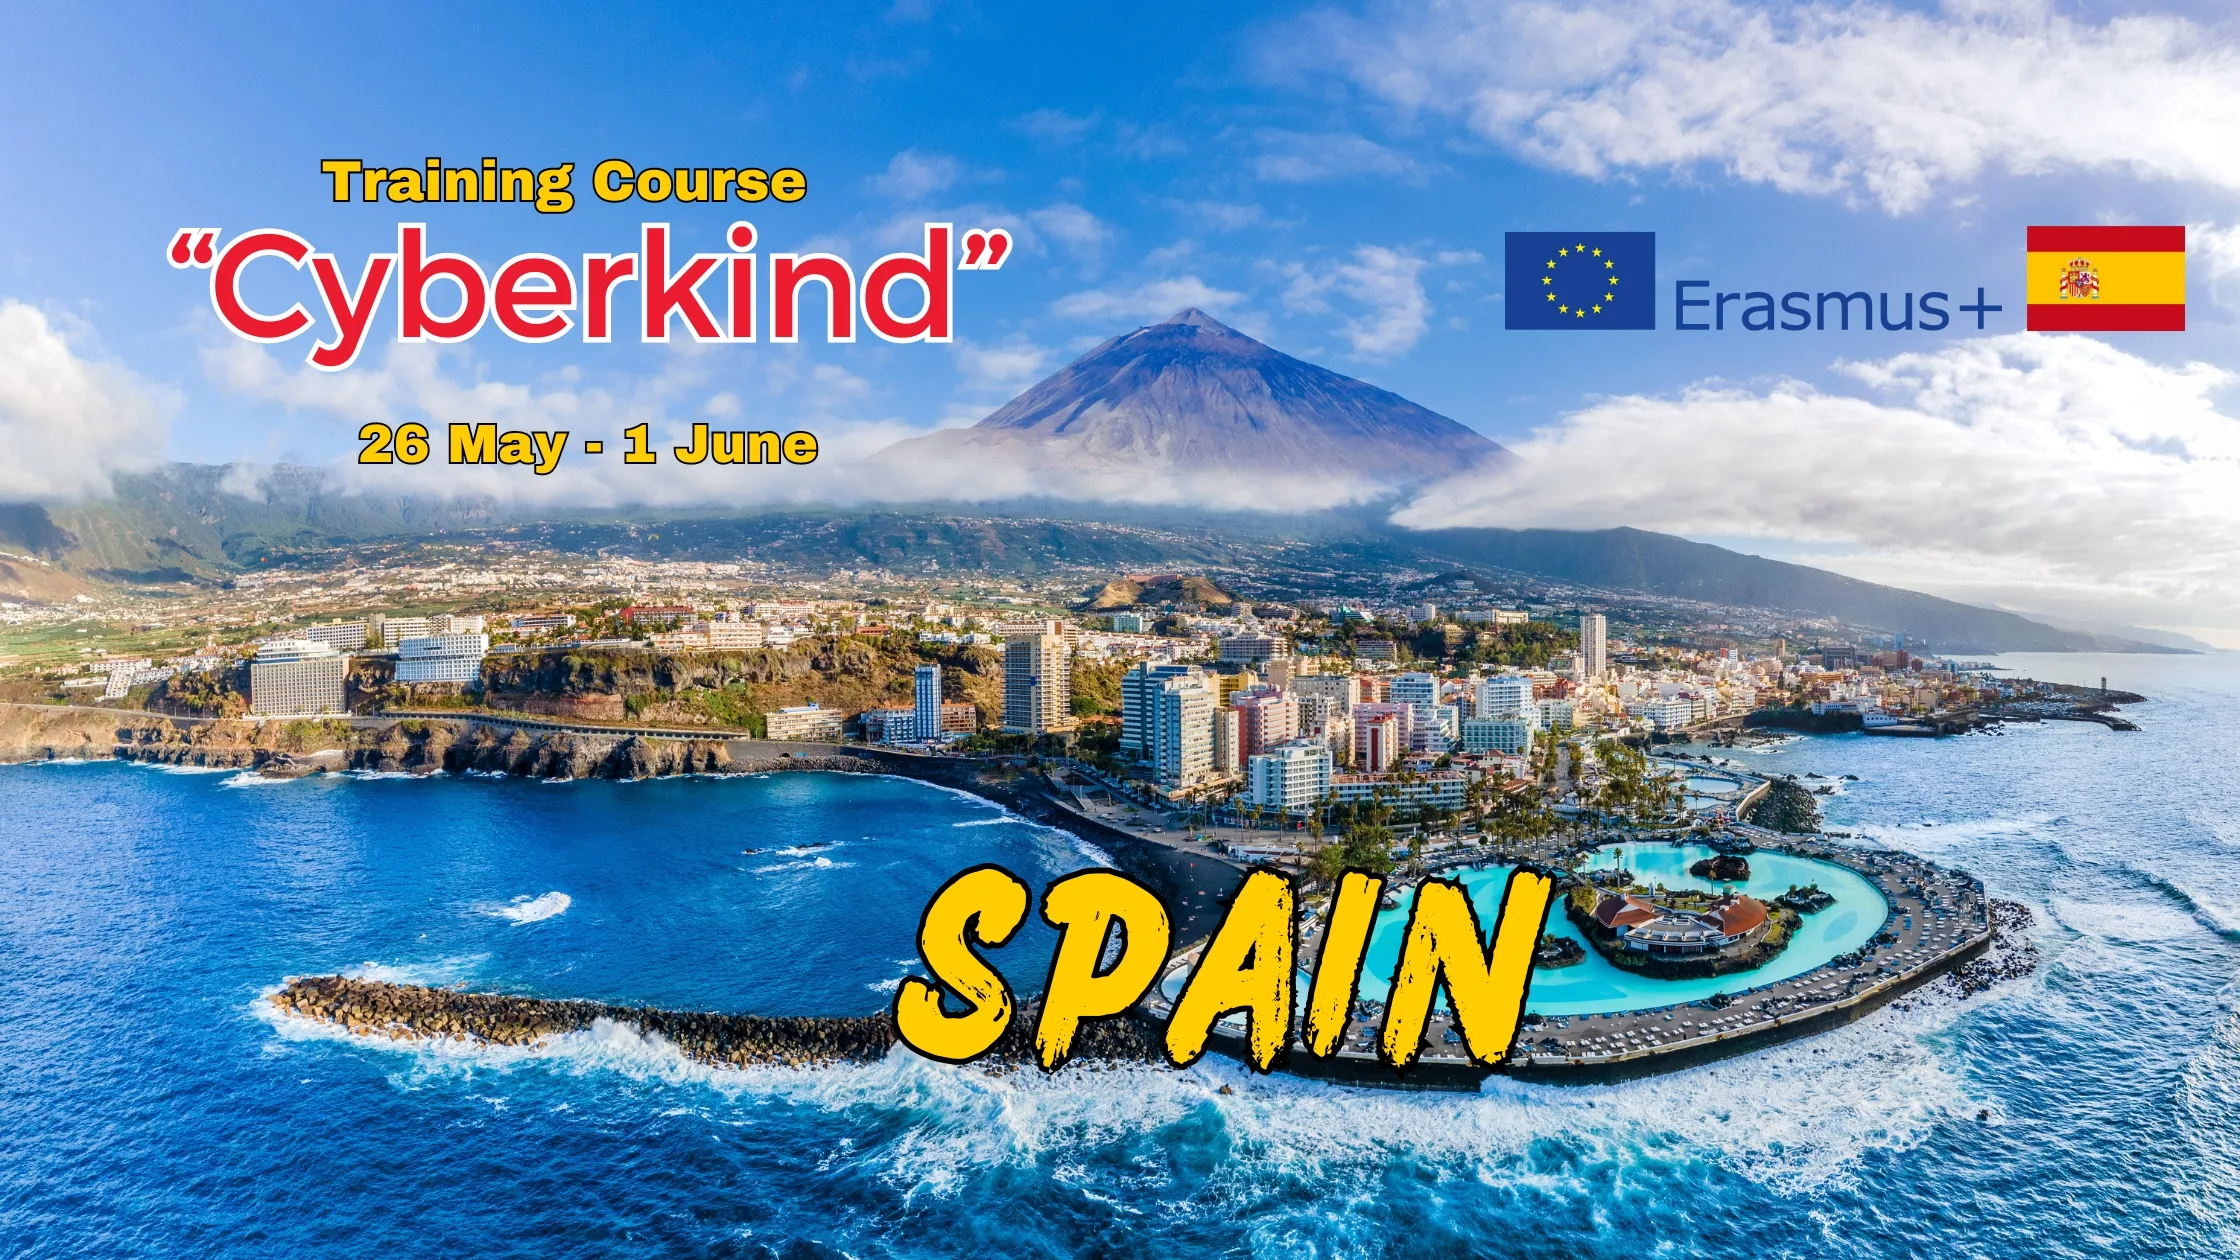 Training Course "Cyberkind" in Tenerife, Spain (Fully Funded)